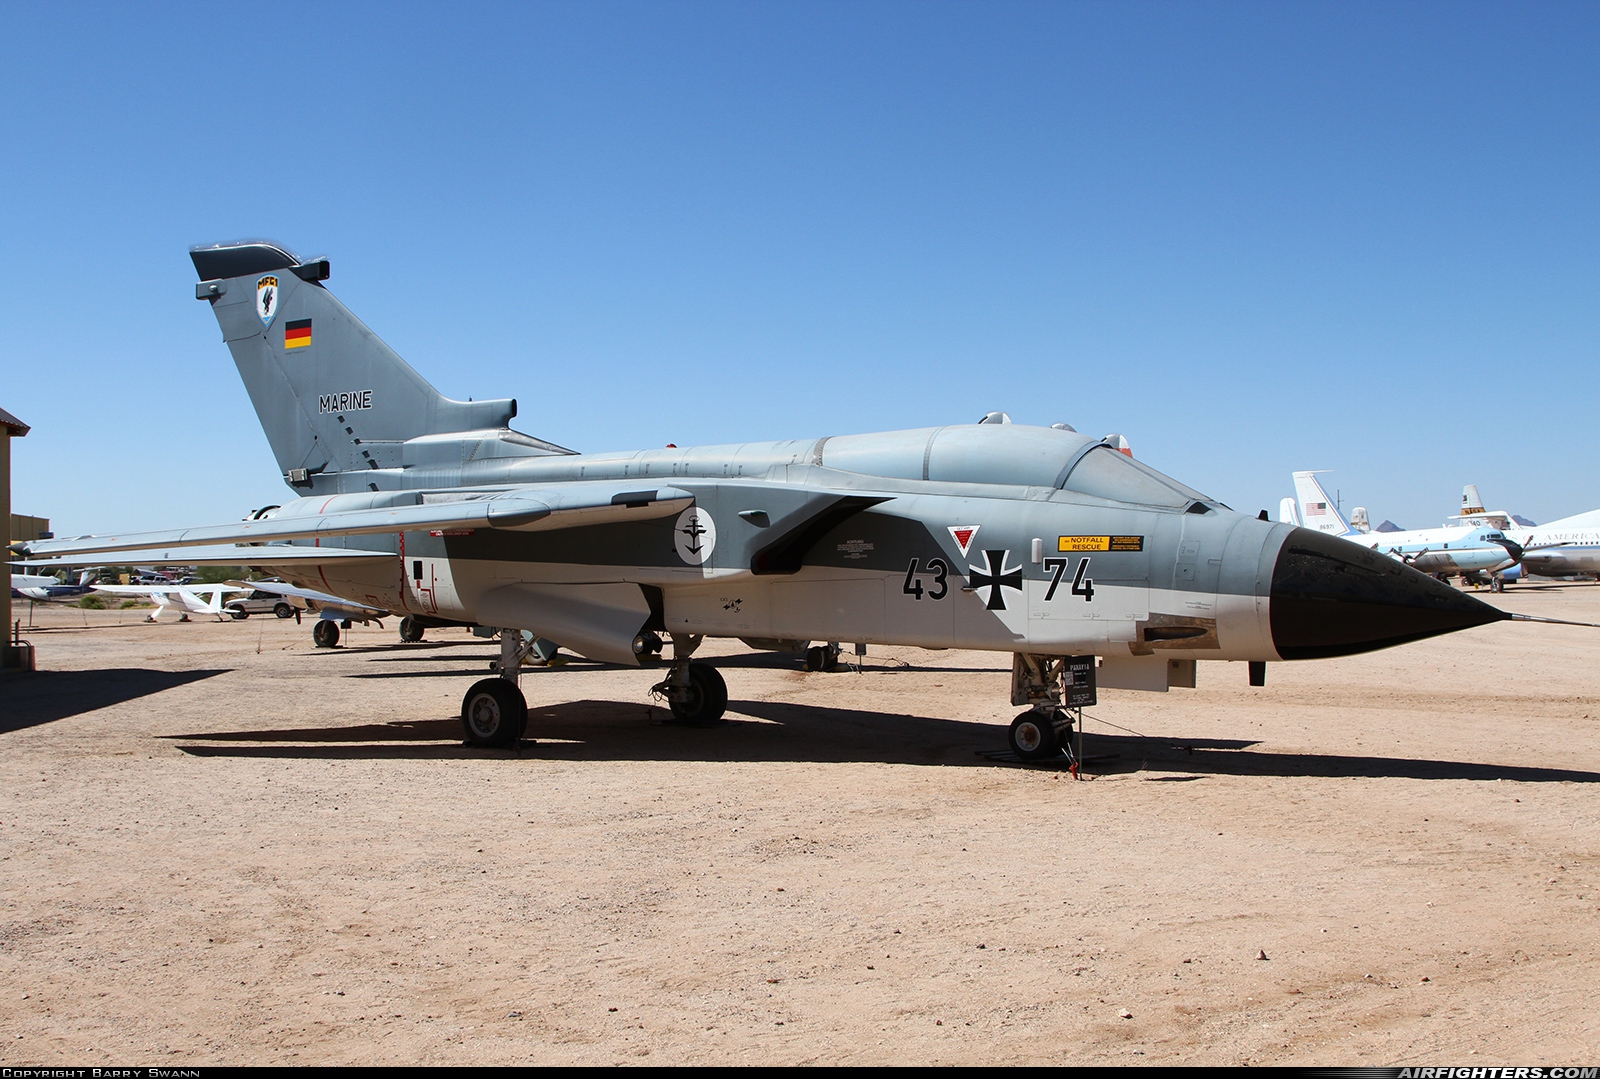 Germany - Navy Panavia Tornado IDS 43+74 at Tucson - Pima Air and Space Museum, USA